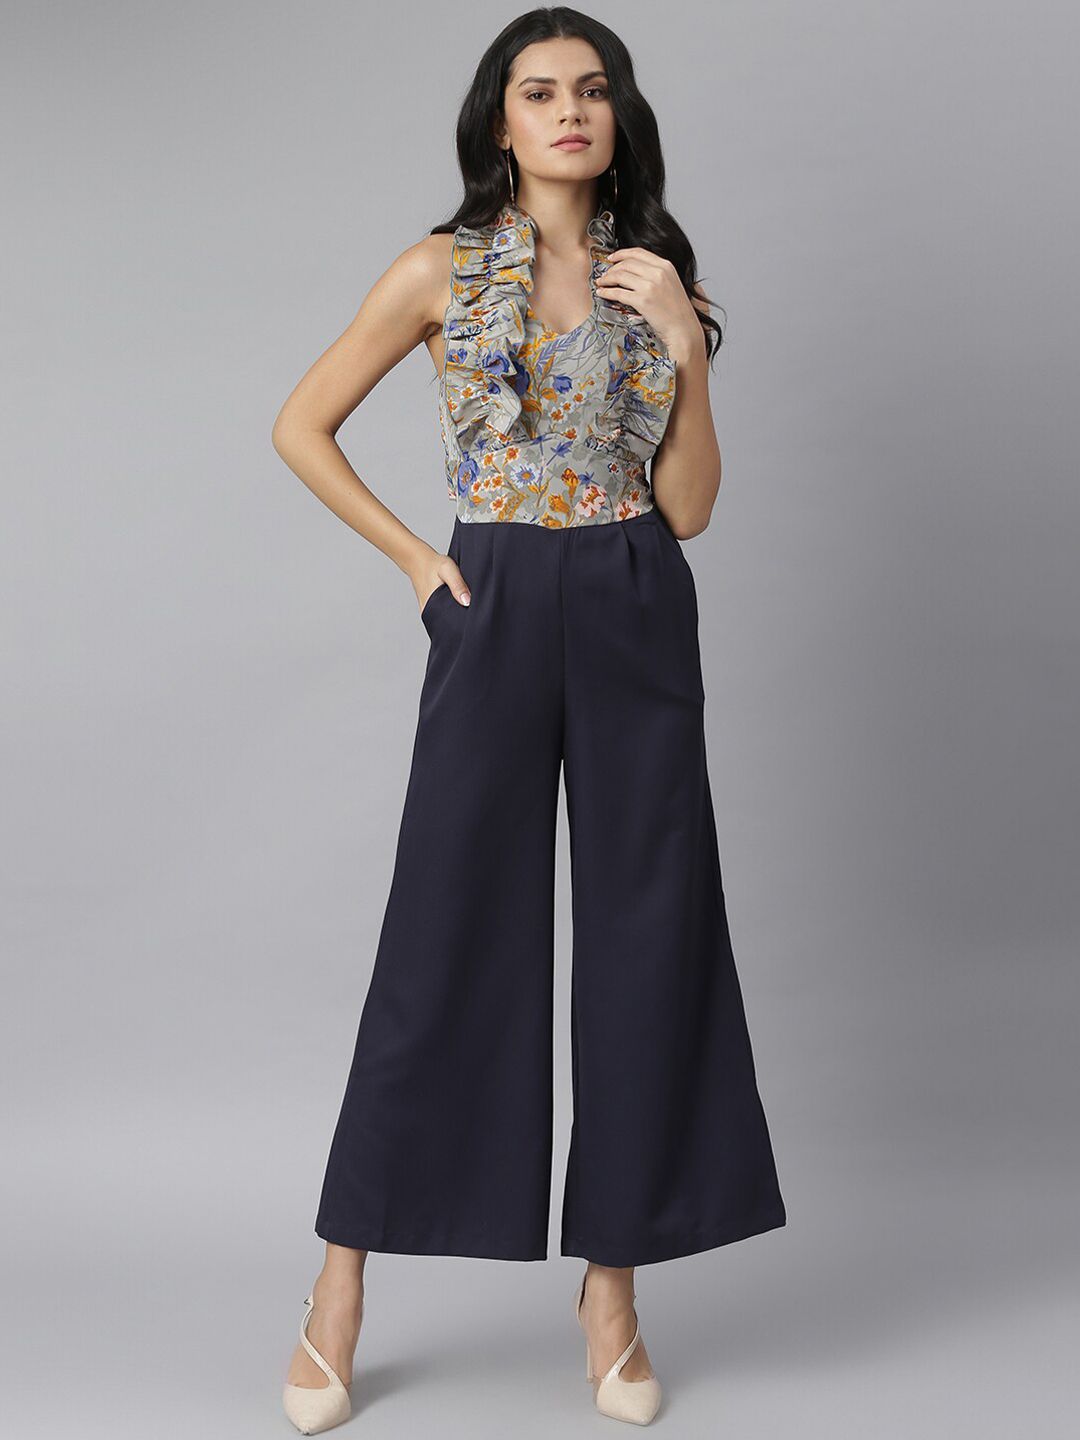 KASSUALLY Grey & Navy Blue Floral Printed Culotte Jumpsuit with Ruffles Price in India